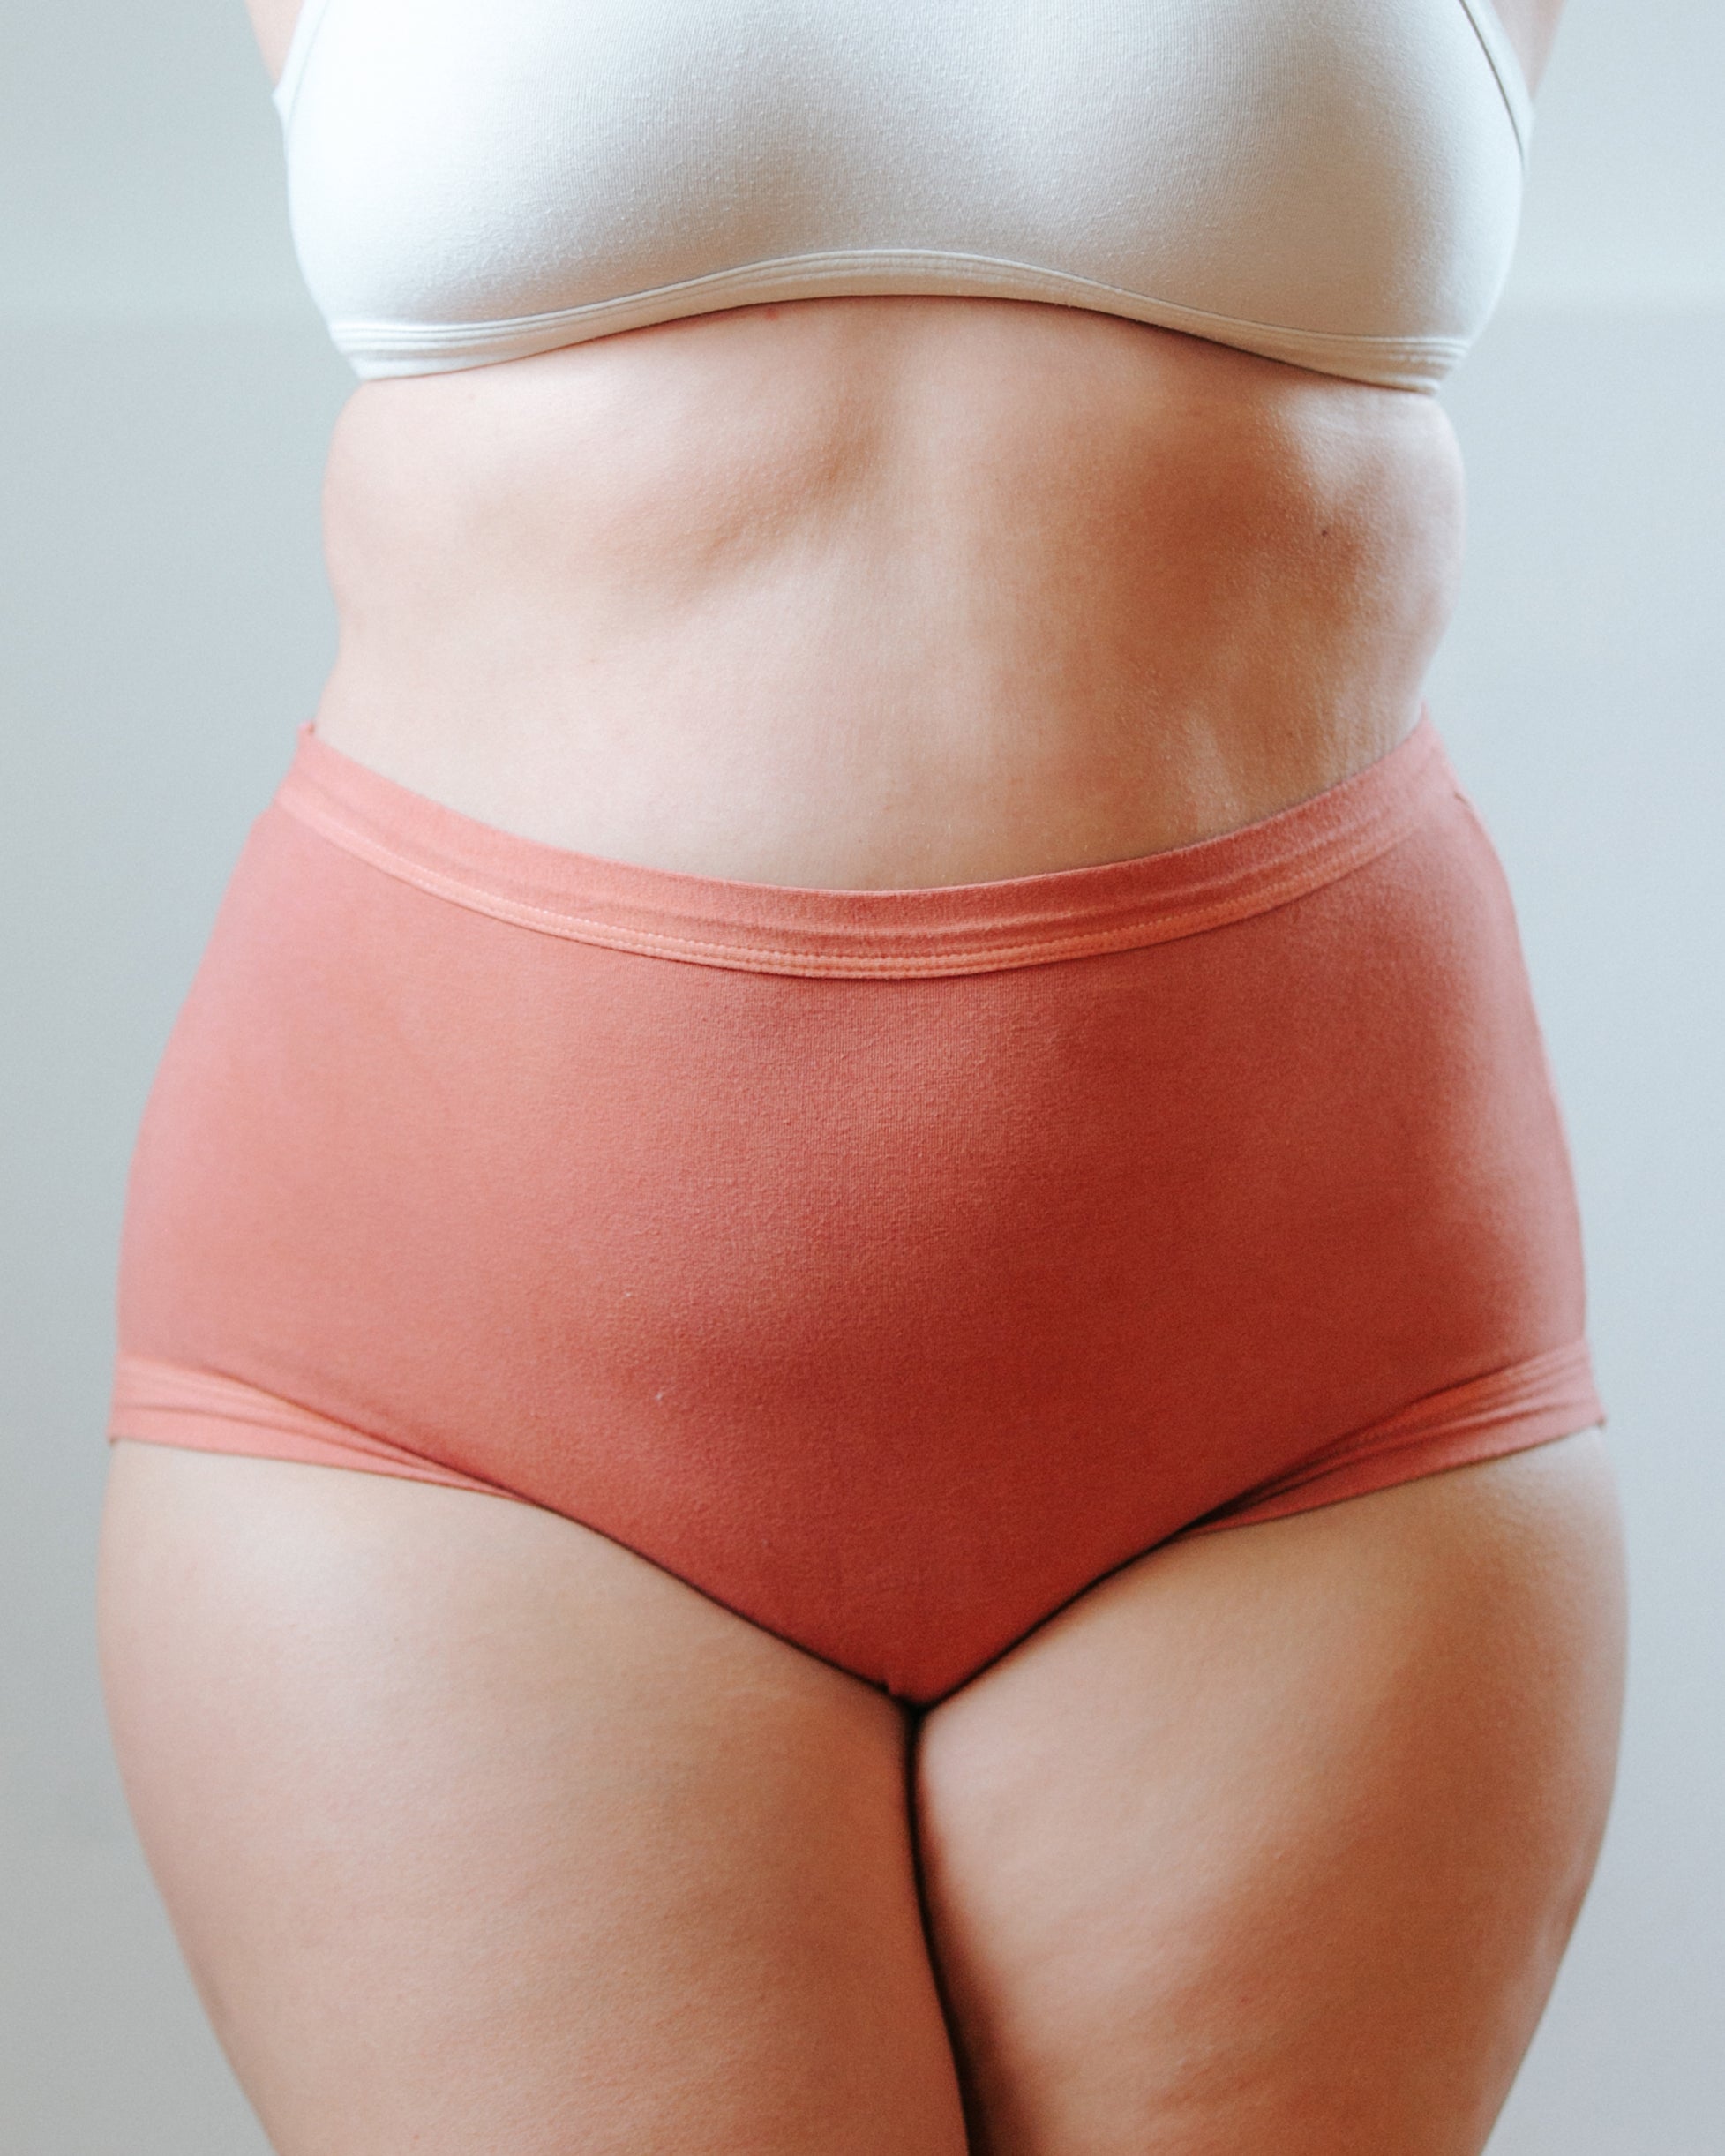 Front photo showing Thunderpants Organic Cotton original style underwear in hand dyed Terracotta color on a model.